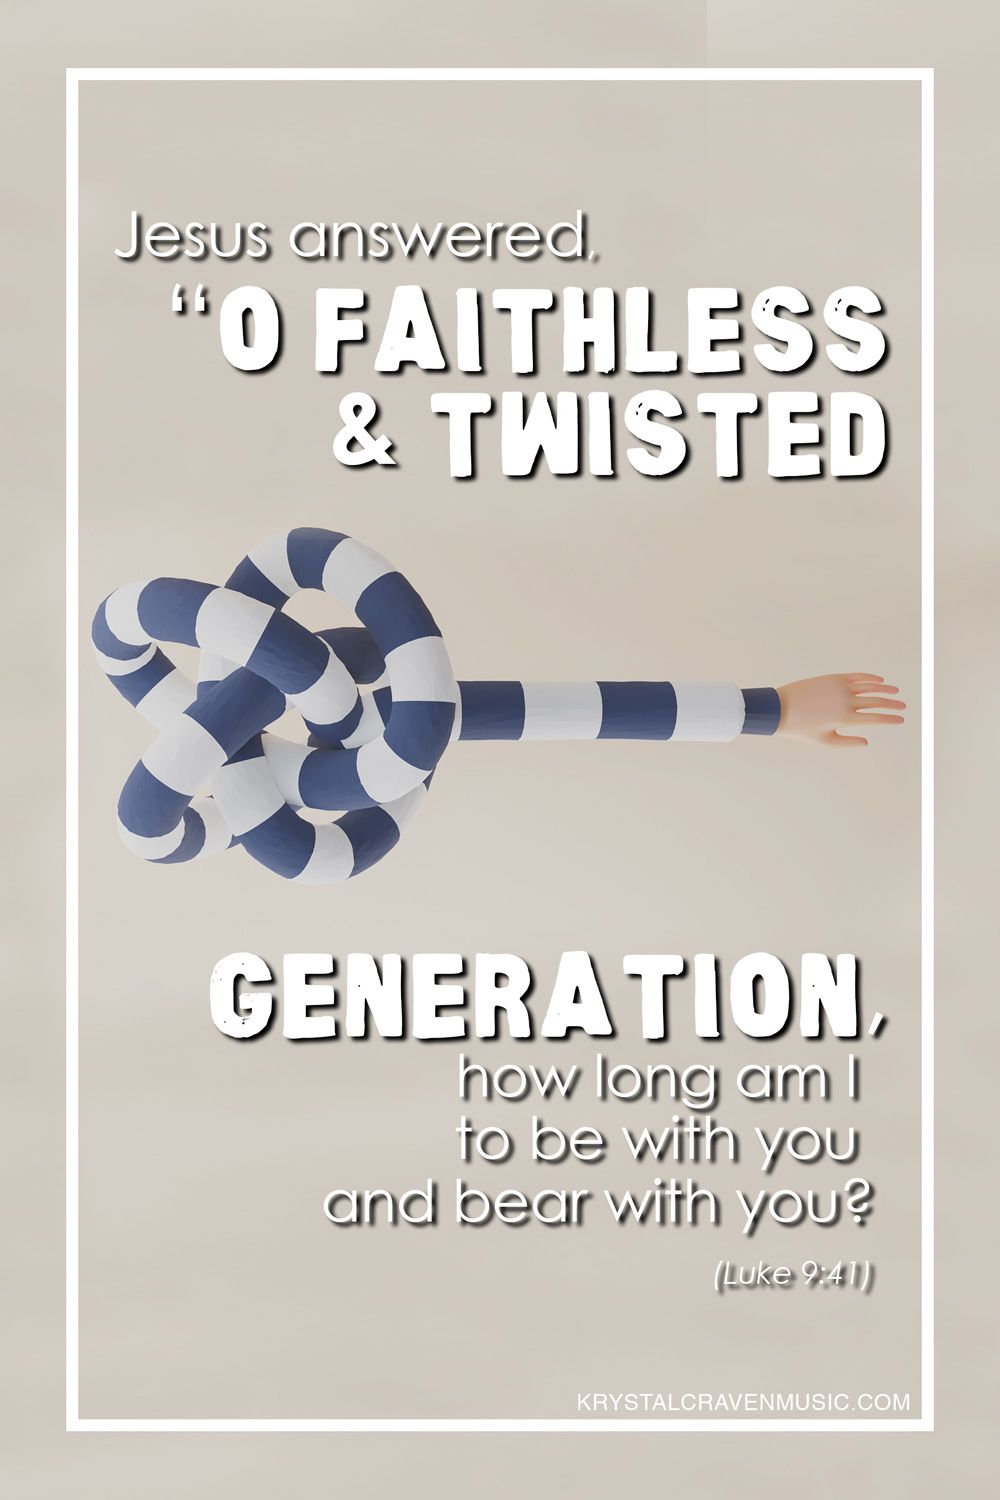 The Bible verse text from Luke 9:41, "O faithless and twisted generation, how long am I to be with you and bear with you?" The text wraps around a long cartoon arm that is reaching towards the right, while the upper part of the arm is tied in a complex knot.